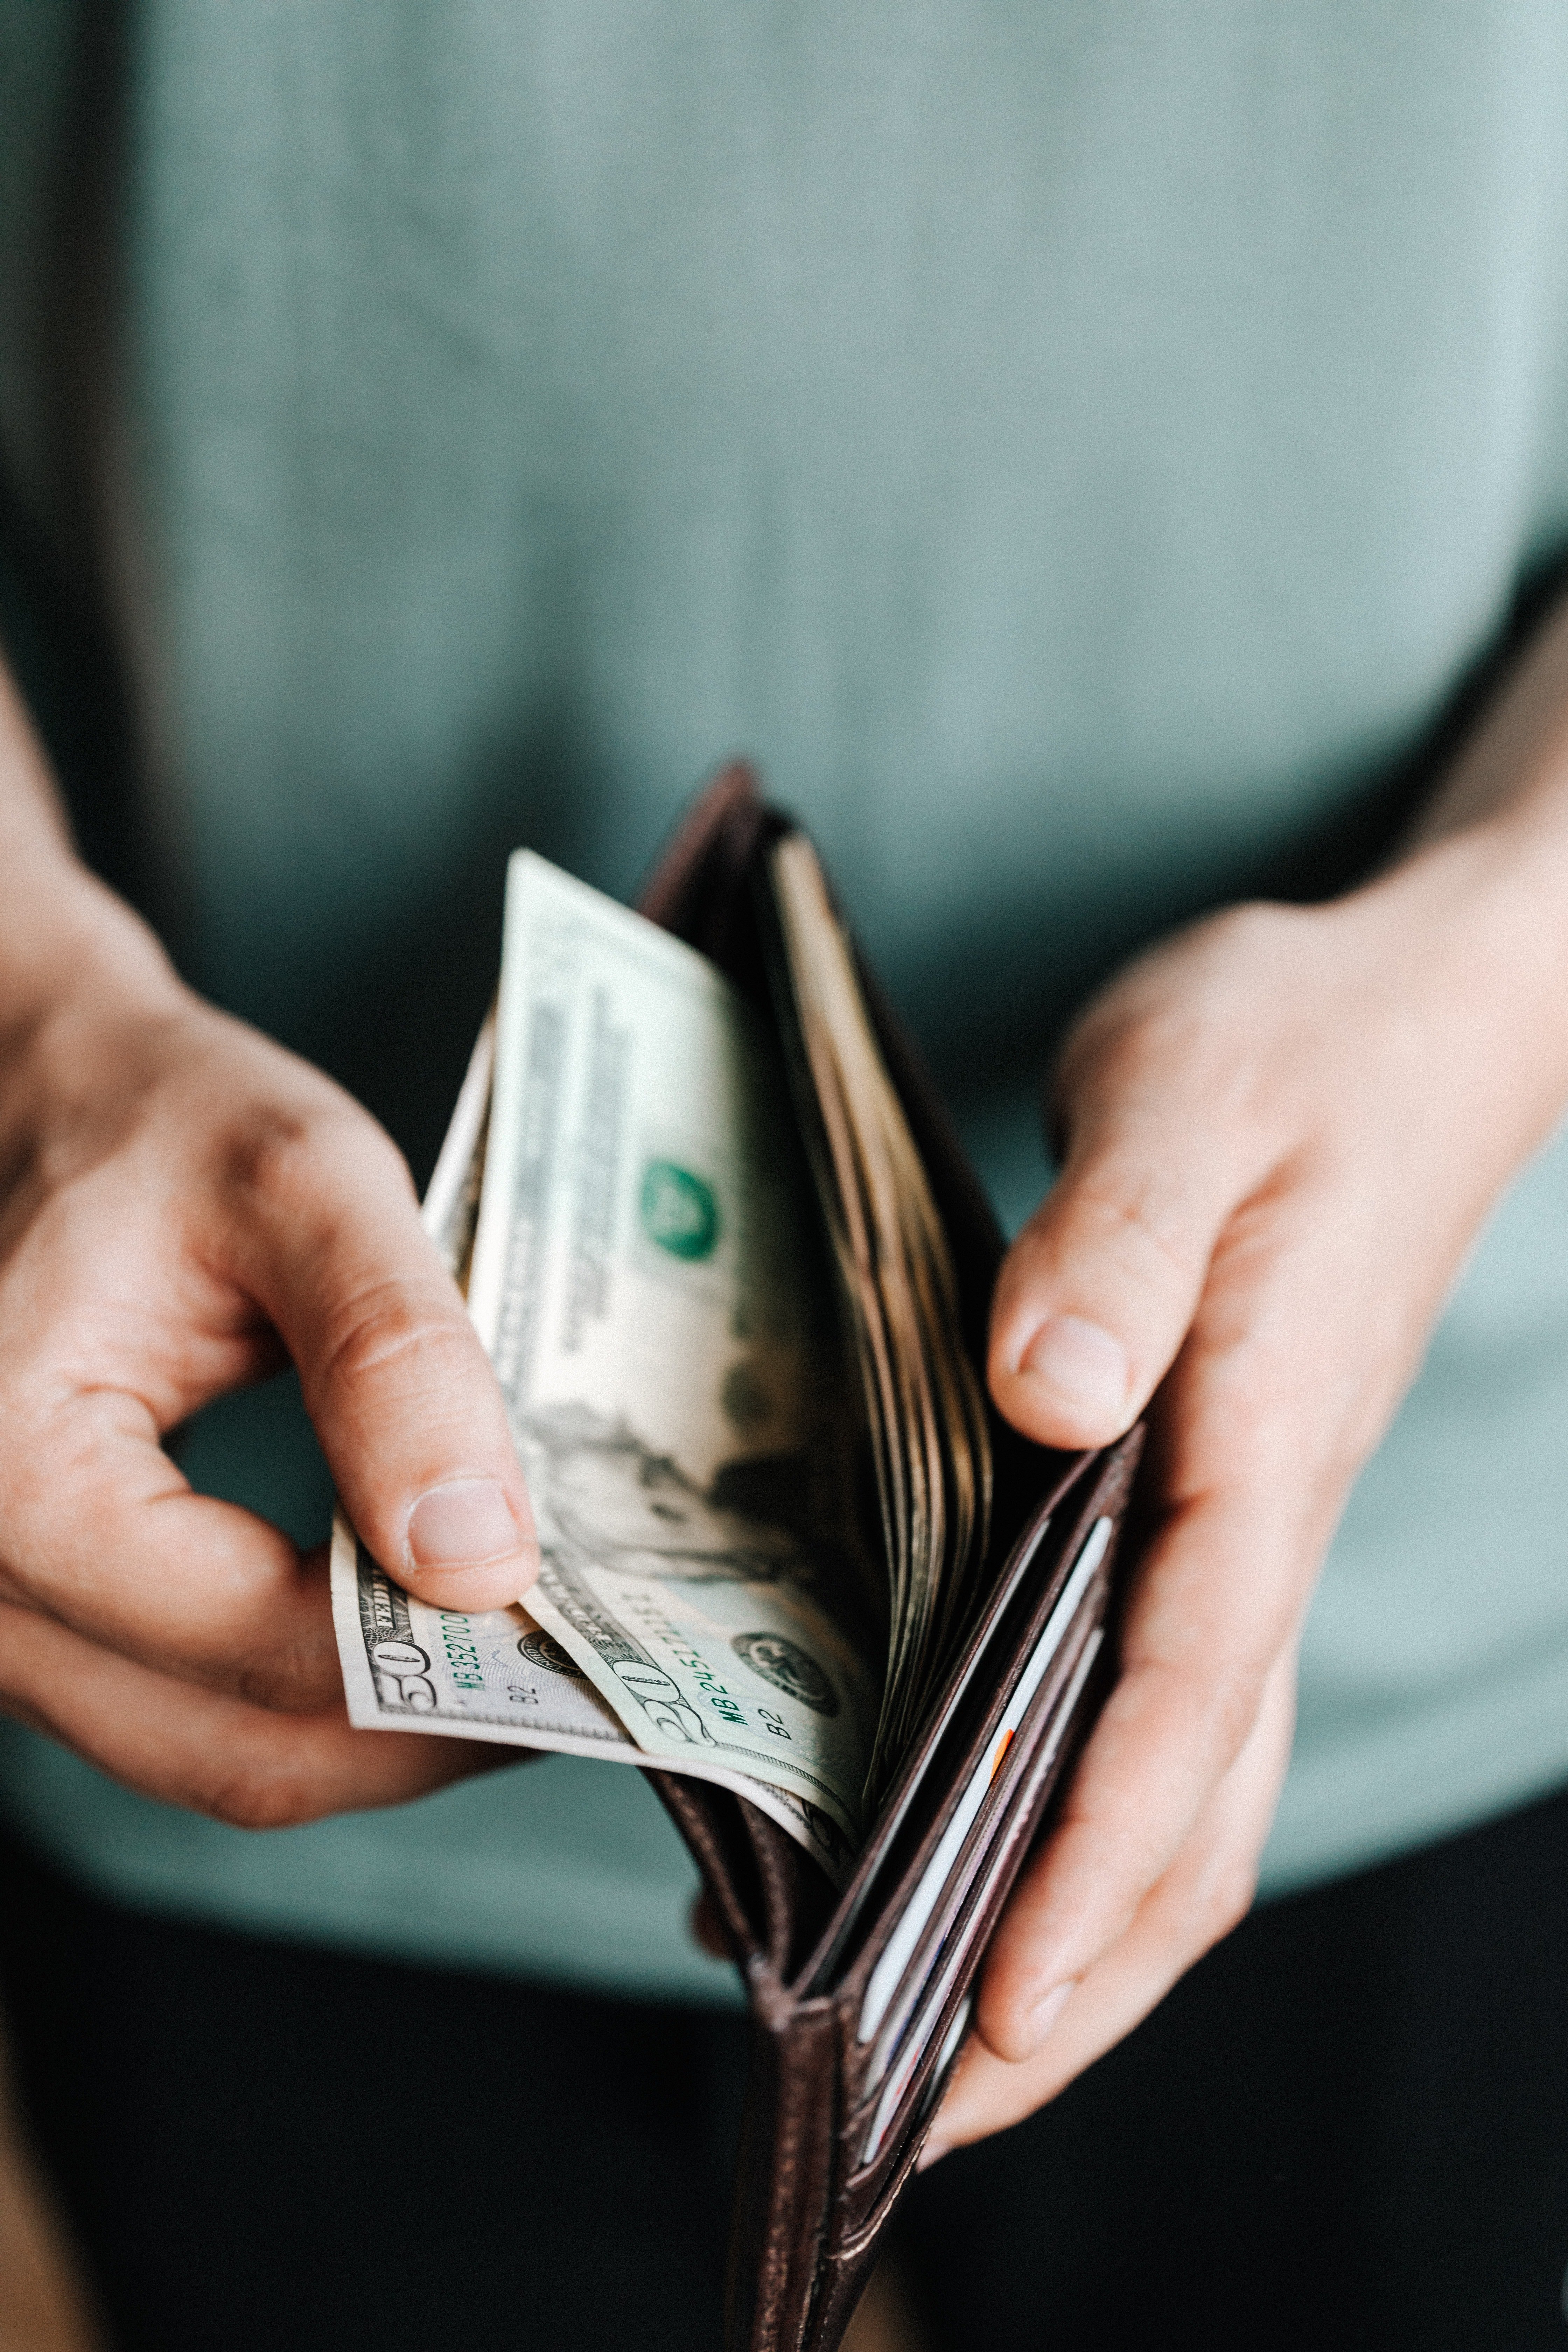 The wallet was loaded with cash. | Source: Pexels